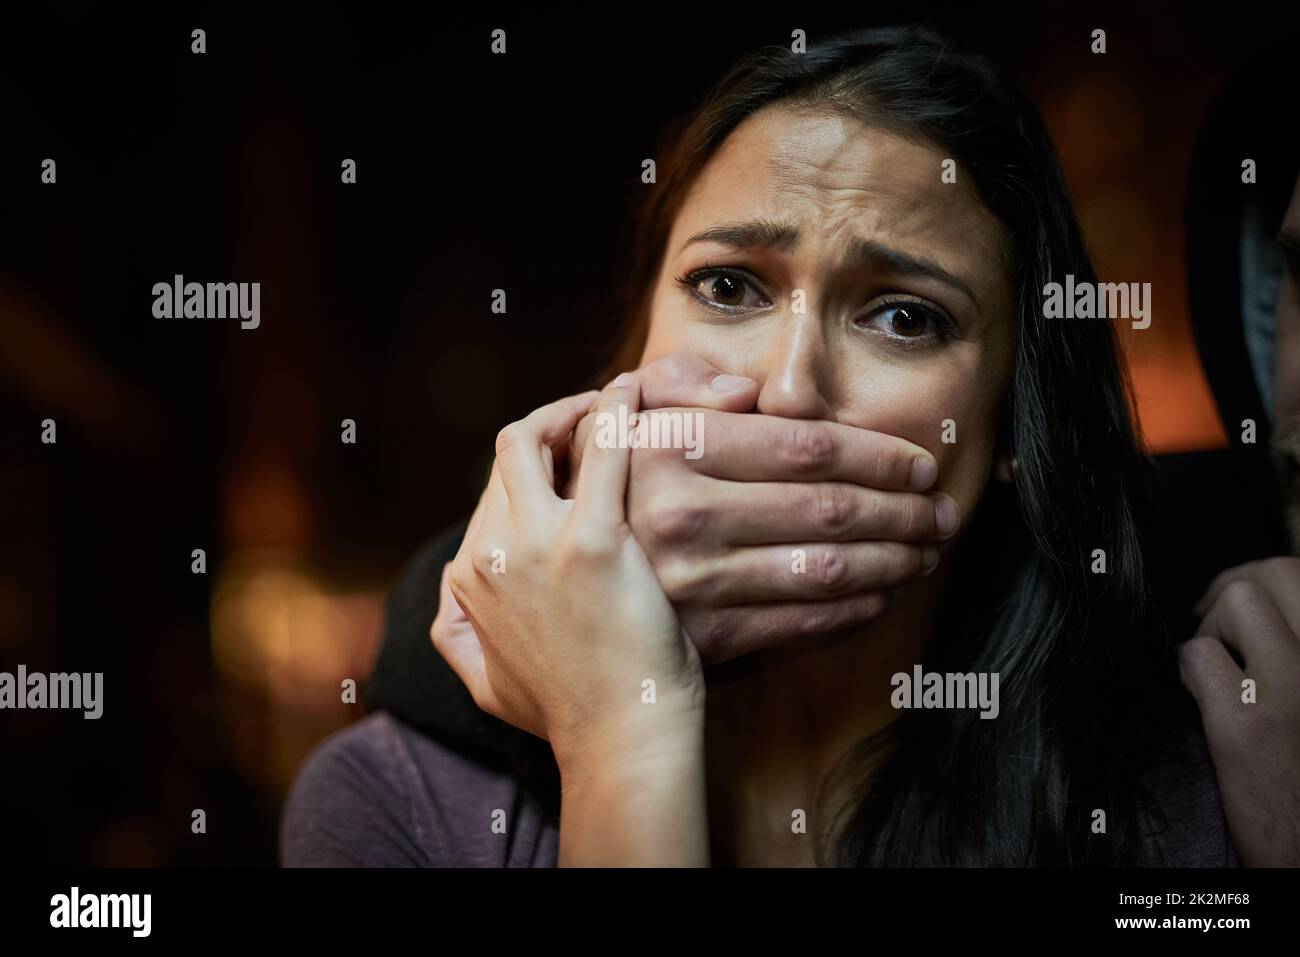 Defenceless and in danger. Portrait of a frightened young woman with her assailants hand over her mouth. Stock Photo